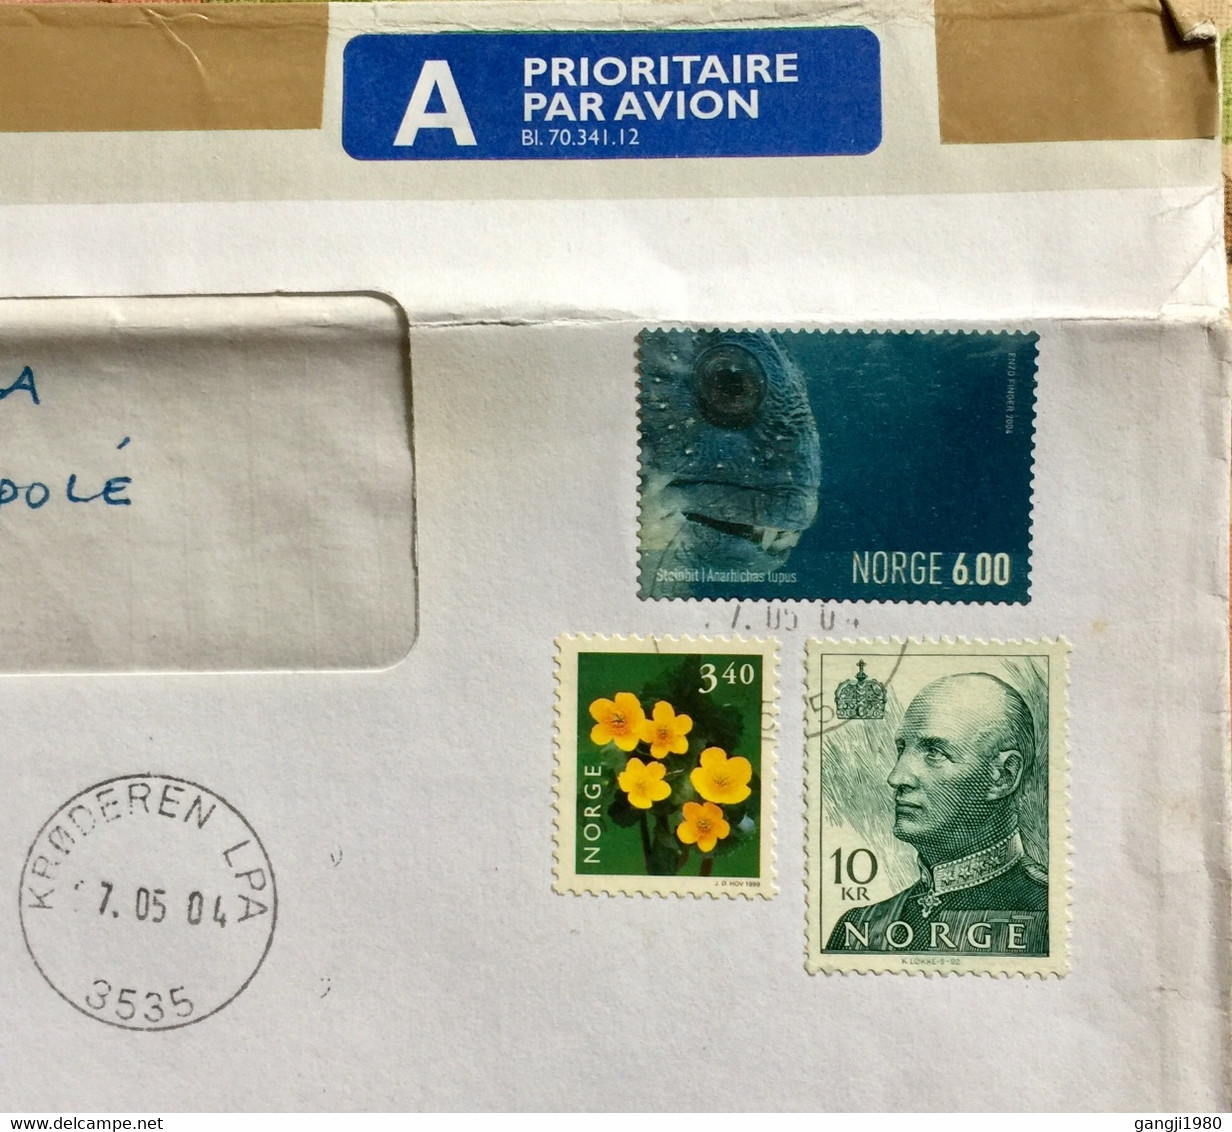 NORWAY 2004,AIRMAIL USED COVER TO LITHUANIA, KRODERN LPA,MARIJAMPOLE, CANCELLATION,19=40 KROWN RATE !!! FISH ,FLOWER, - Lettres & Documents